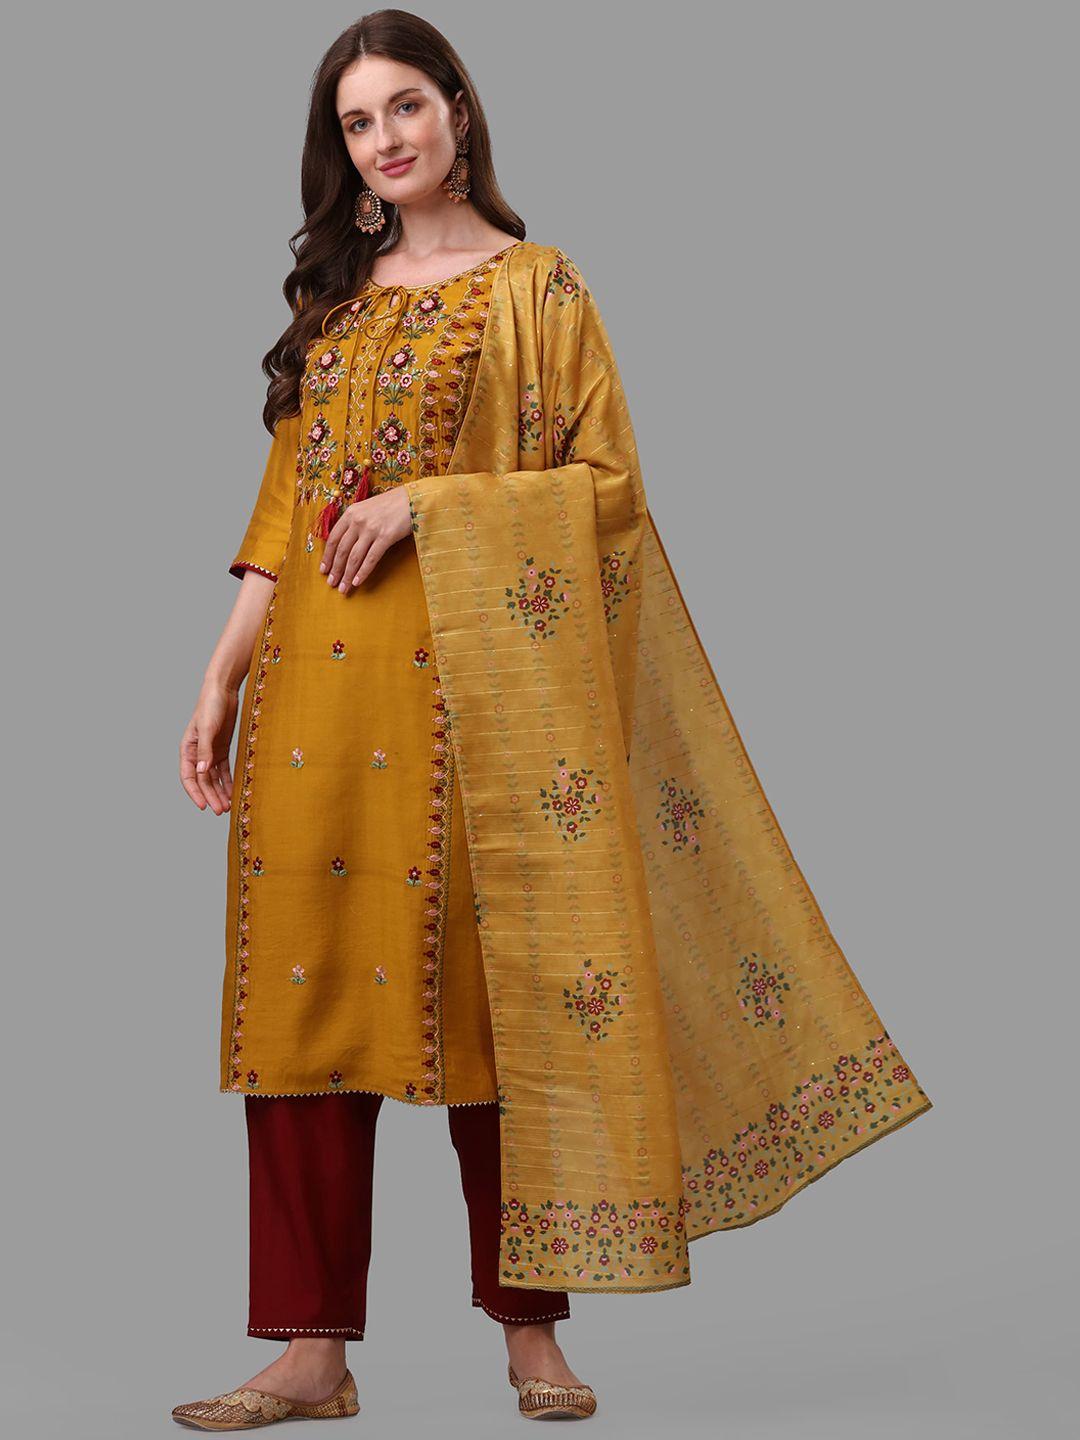 berrylicious mustard yellow floral embroidered chanderi cotton kurta with trousers & dupatta